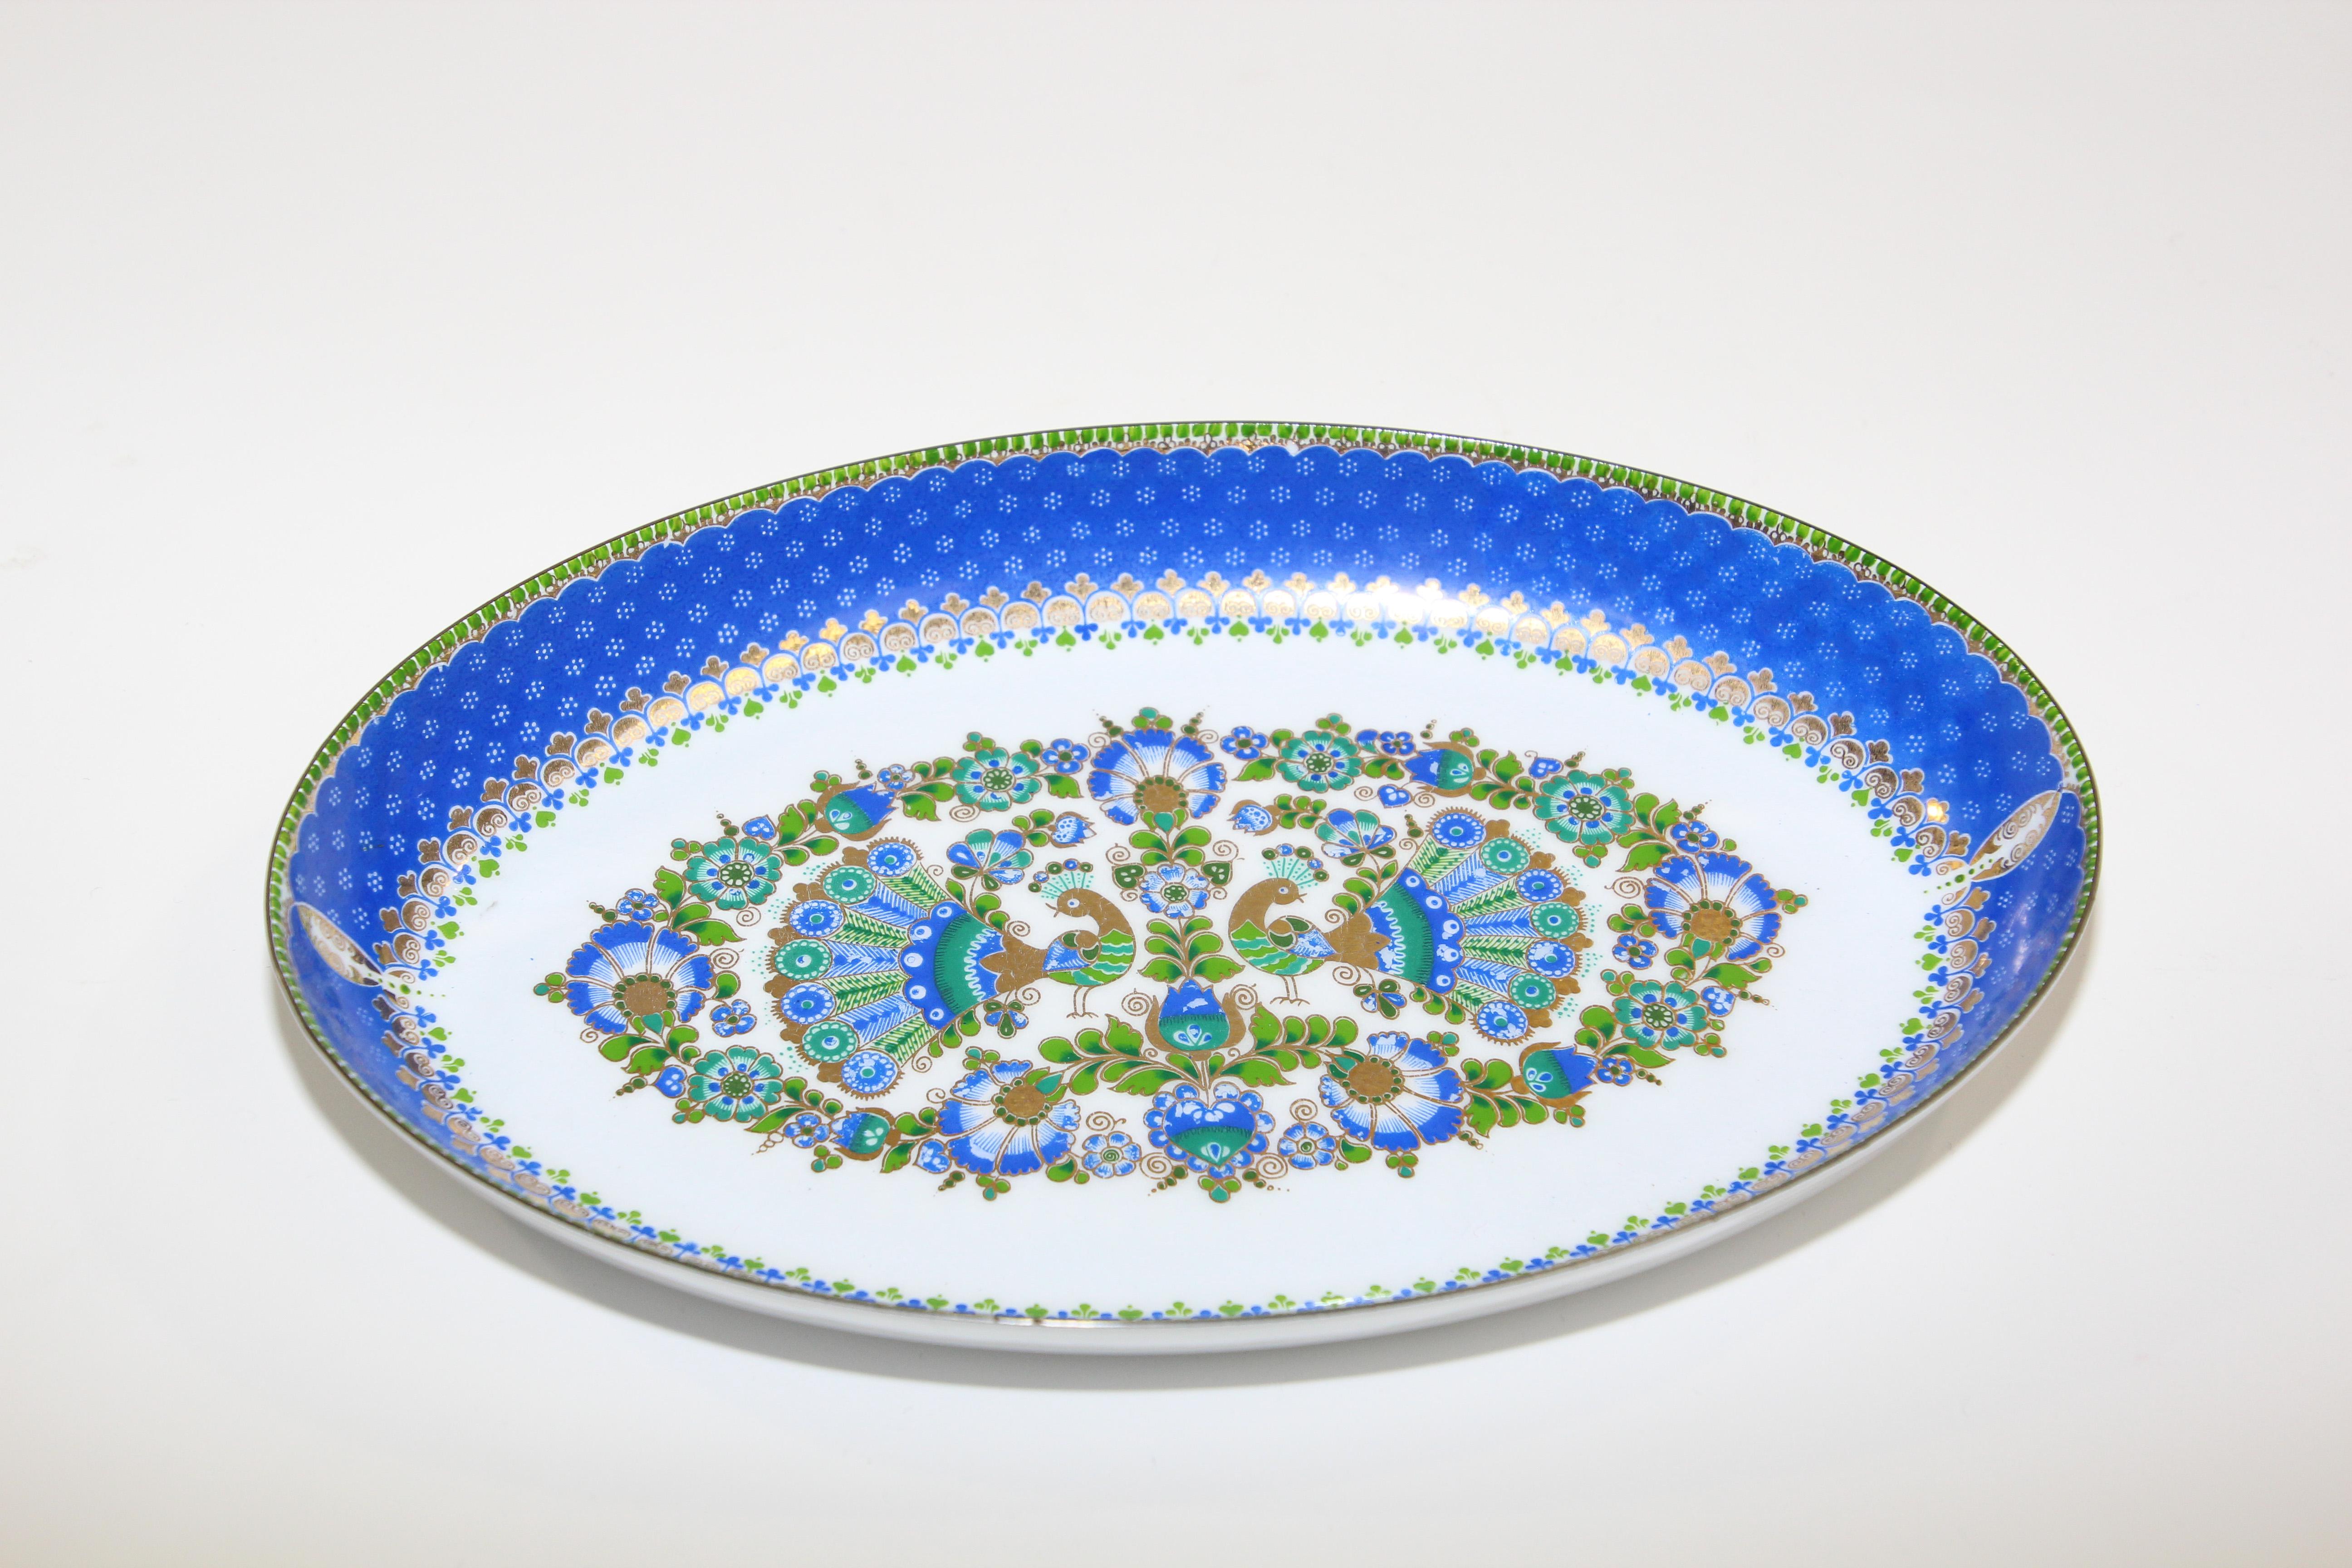 Studio Steinbock Austria enamelware small oval dish, vide poche, appetizer platter.
Beautiful handcrafted enameled oval metal bowl decorated with vivid shades of blue, green and gold, hand painted with precision detail and color with floral and two